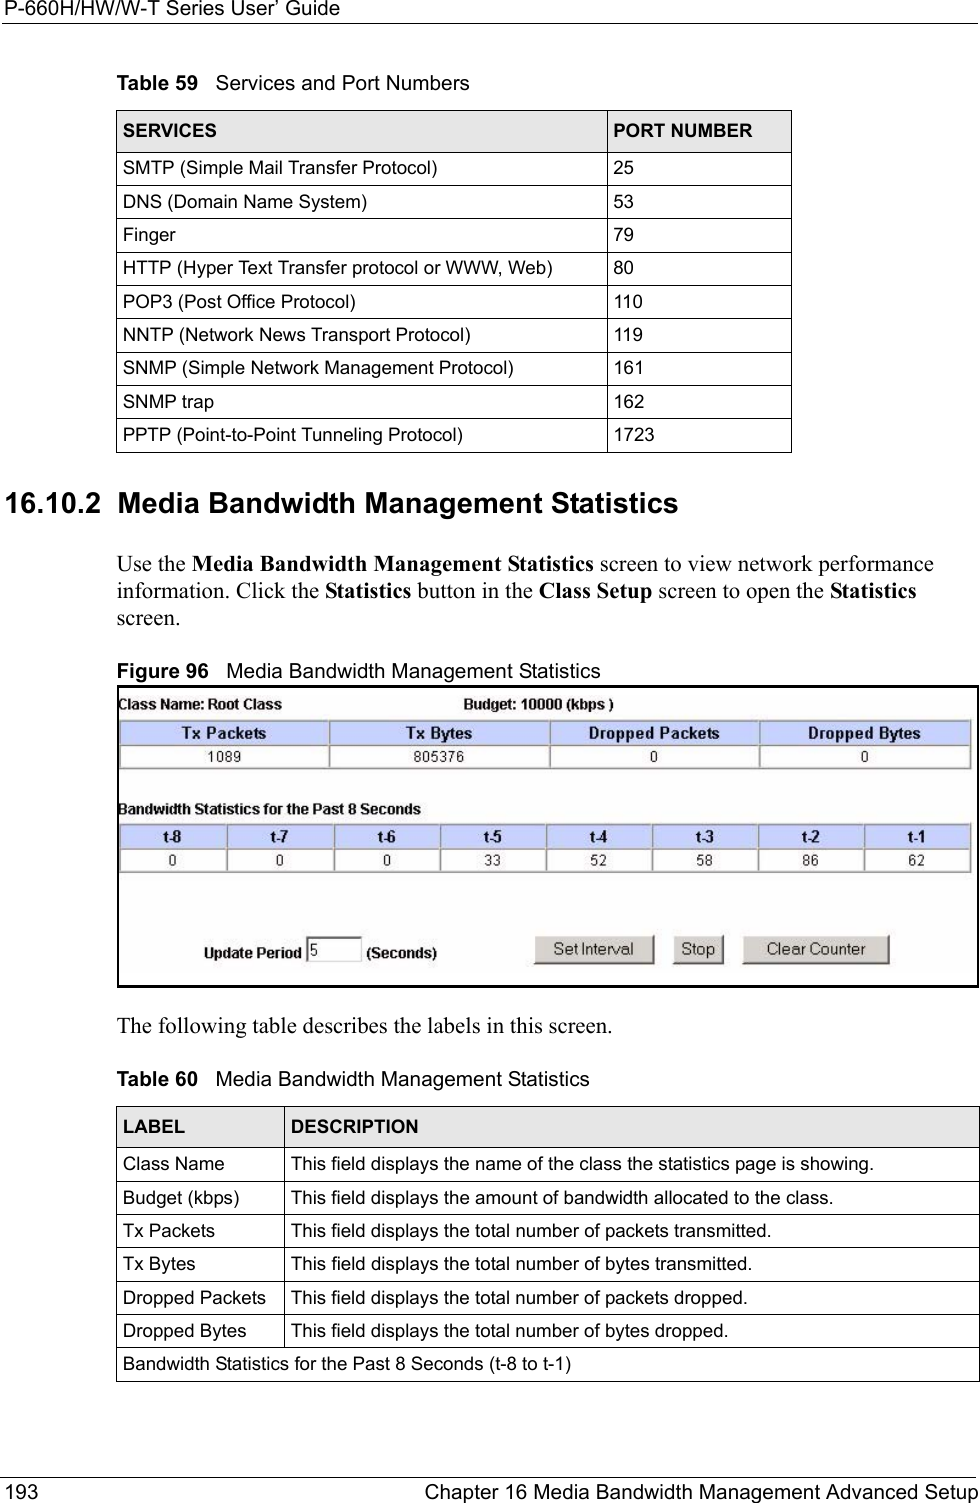 P-660H/HW/W-T Series User’ Guide193 Chapter 16 Media Bandwidth Management Advanced Setup16.10.2  Media Bandwidth Management Statistics  Use the Media Bandwidth Management Statistics screen to view network performance information. Click the Statistics button in the Class Setup screen to open the Statistics screen.Figure 96   Media Bandwidth Management Statistics The following table describes the labels in this screen.SMTP (Simple Mail Transfer Protocol) 25DNS (Domain Name System) 53Finger 79HTTP (Hyper Text Transfer protocol or WWW, Web) 80POP3 (Post Office Protocol) 110NNTP (Network News Transport Protocol) 119SNMP (Simple Network Management Protocol) 161SNMP trap 162PPTP (Point-to-Point Tunneling Protocol) 1723Table 59   Services and Port NumbersSERVICES PORT NUMBERTable 60   Media Bandwidth Management StatisticsLABEL DESCRIPTIONClass Name This field displays the name of the class the statistics page is showing. Budget (kbps) This field displays the amount of bandwidth allocated to the class. Tx Packets This field displays the total number of packets transmitted. Tx Bytes This field displays the total number of bytes transmitted. Dropped Packets This field displays the total number of packets dropped. Dropped Bytes This field displays the total number of bytes dropped. Bandwidth Statistics for the Past 8 Seconds (t-8 to t-1)